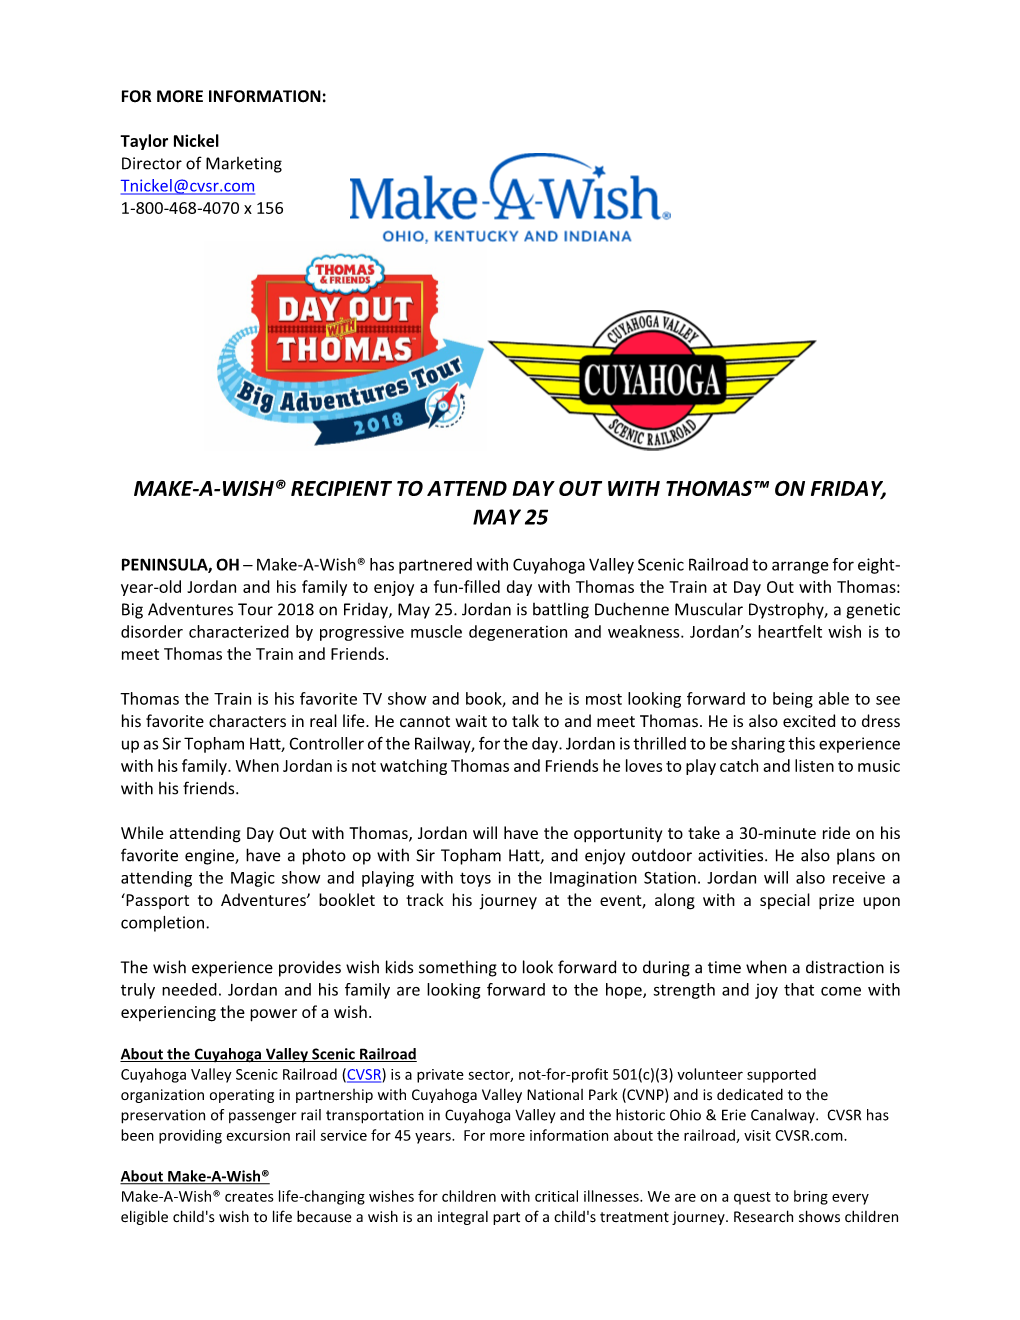 Make-A-Wish® Recipient to Attend Day out with Thomas™ on Friday, May 25